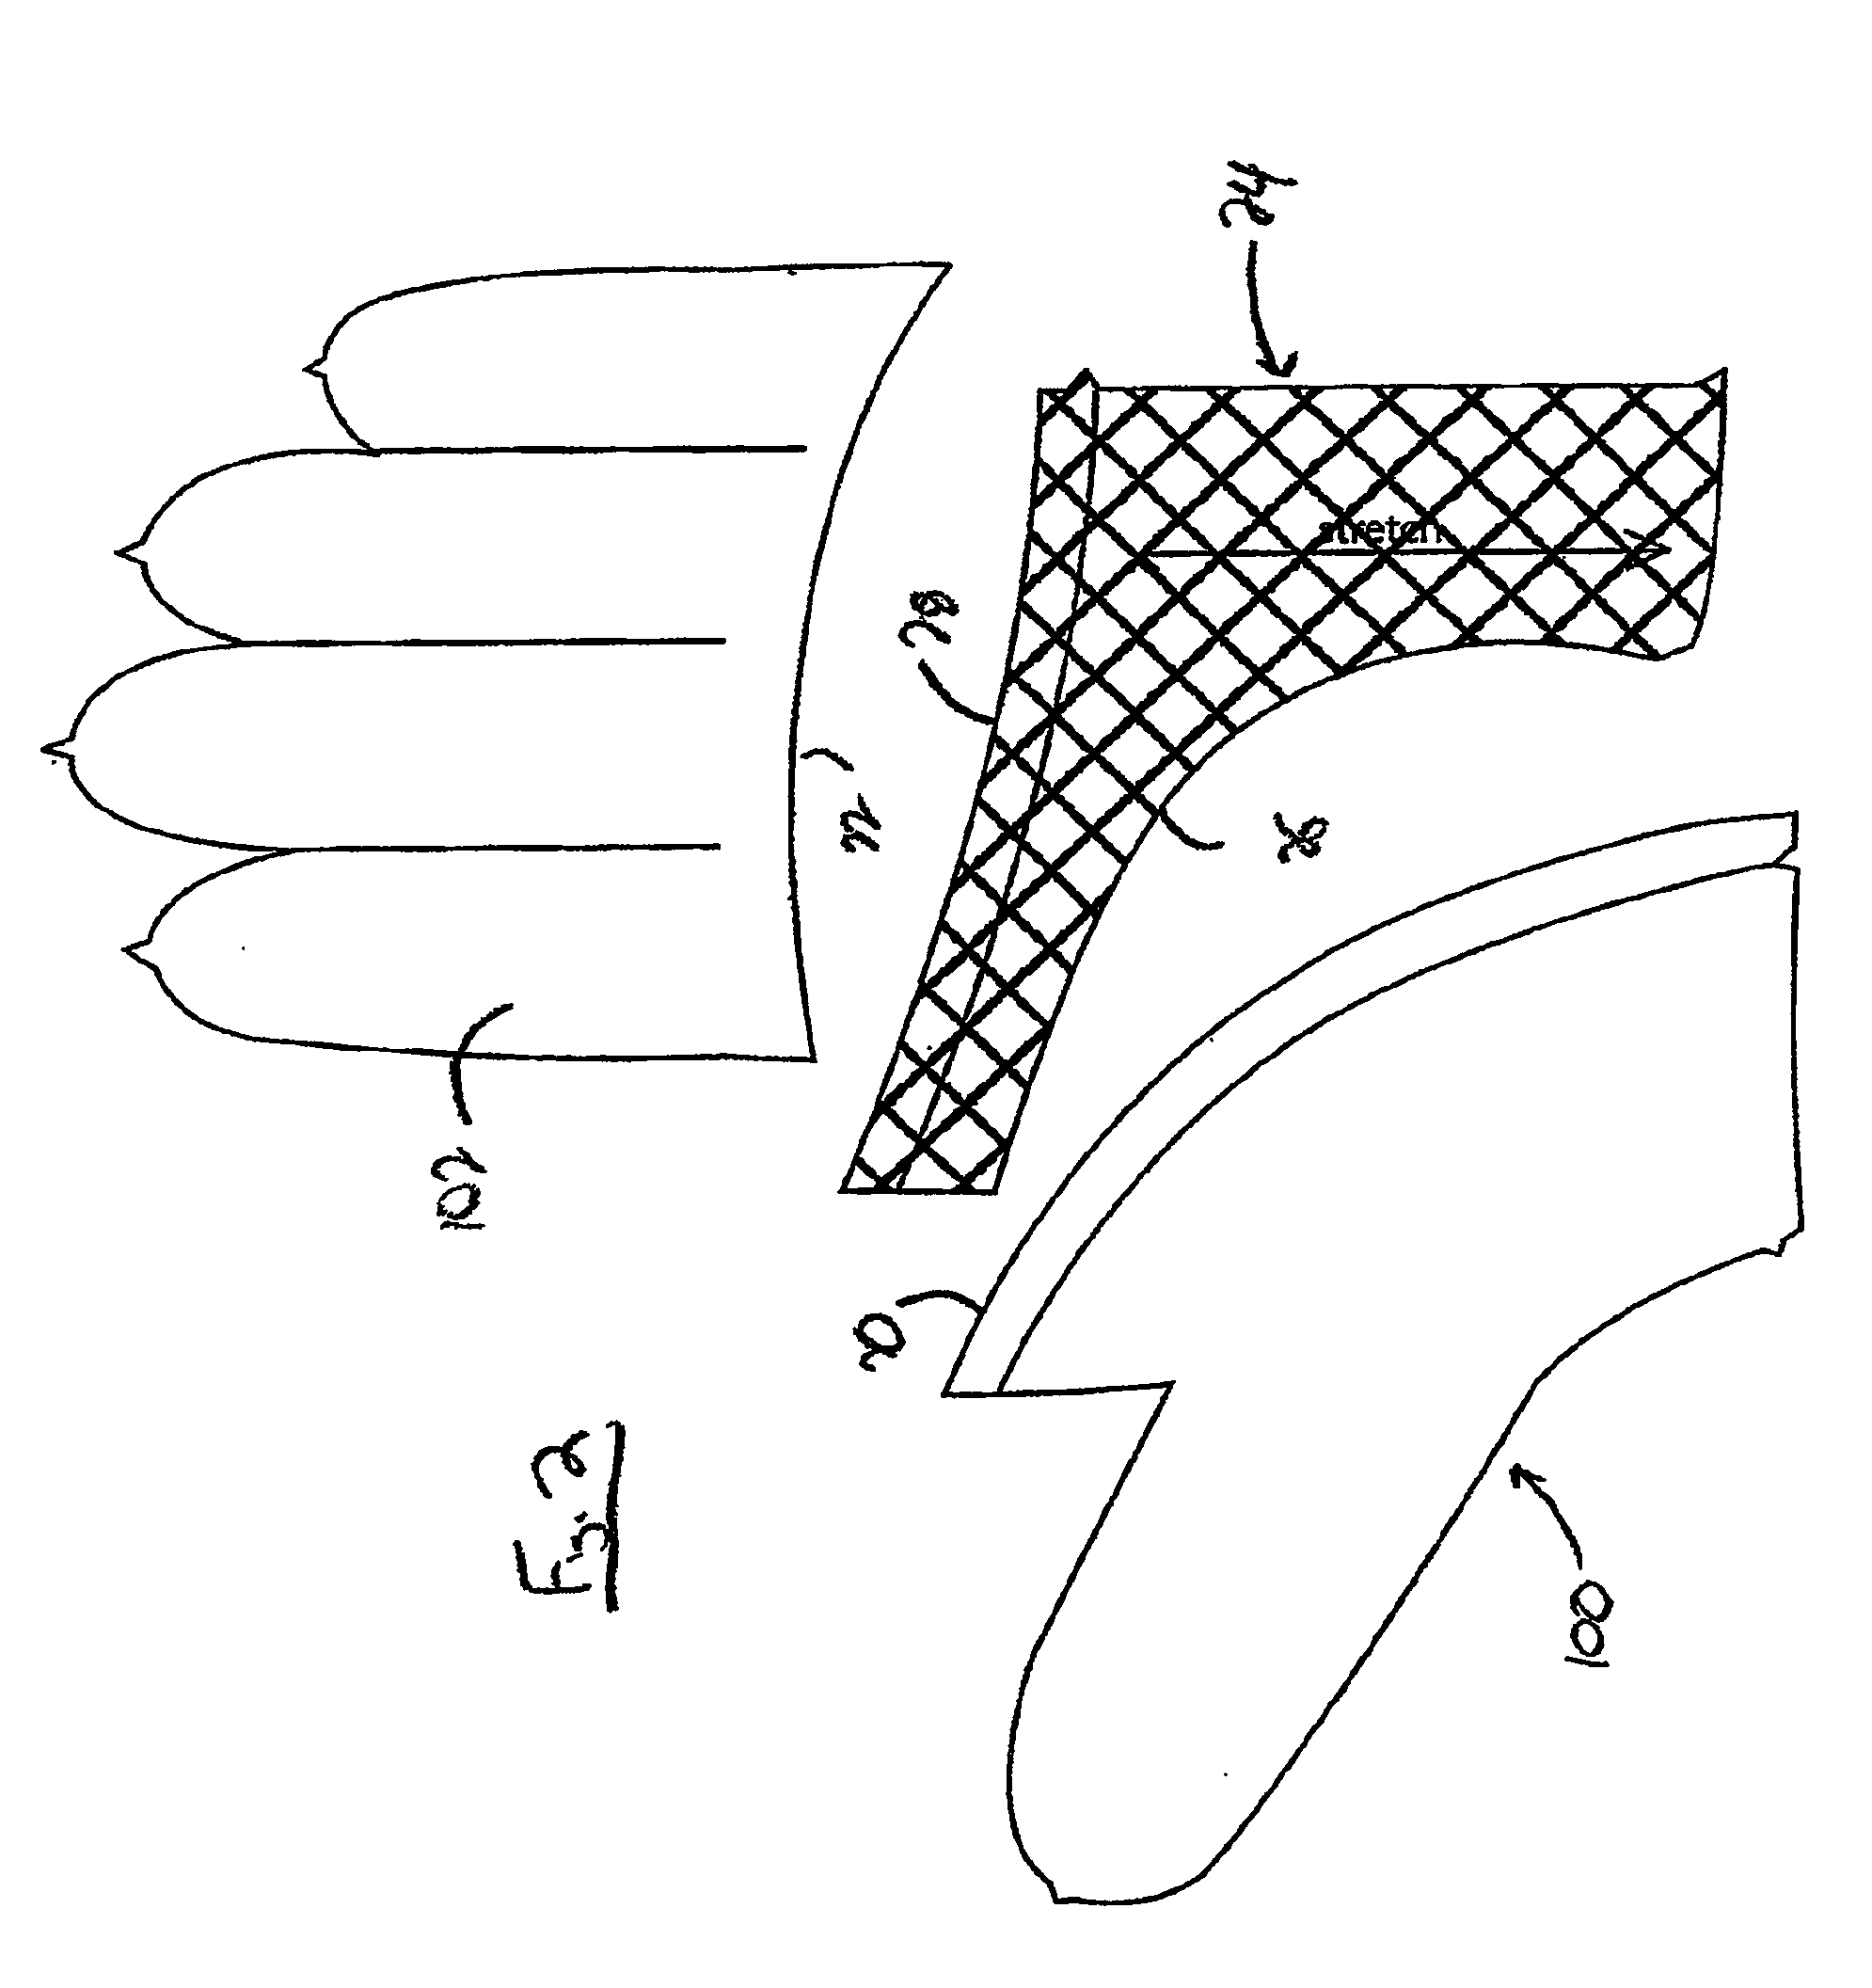 Glove with Non-Bunching Palm Construction